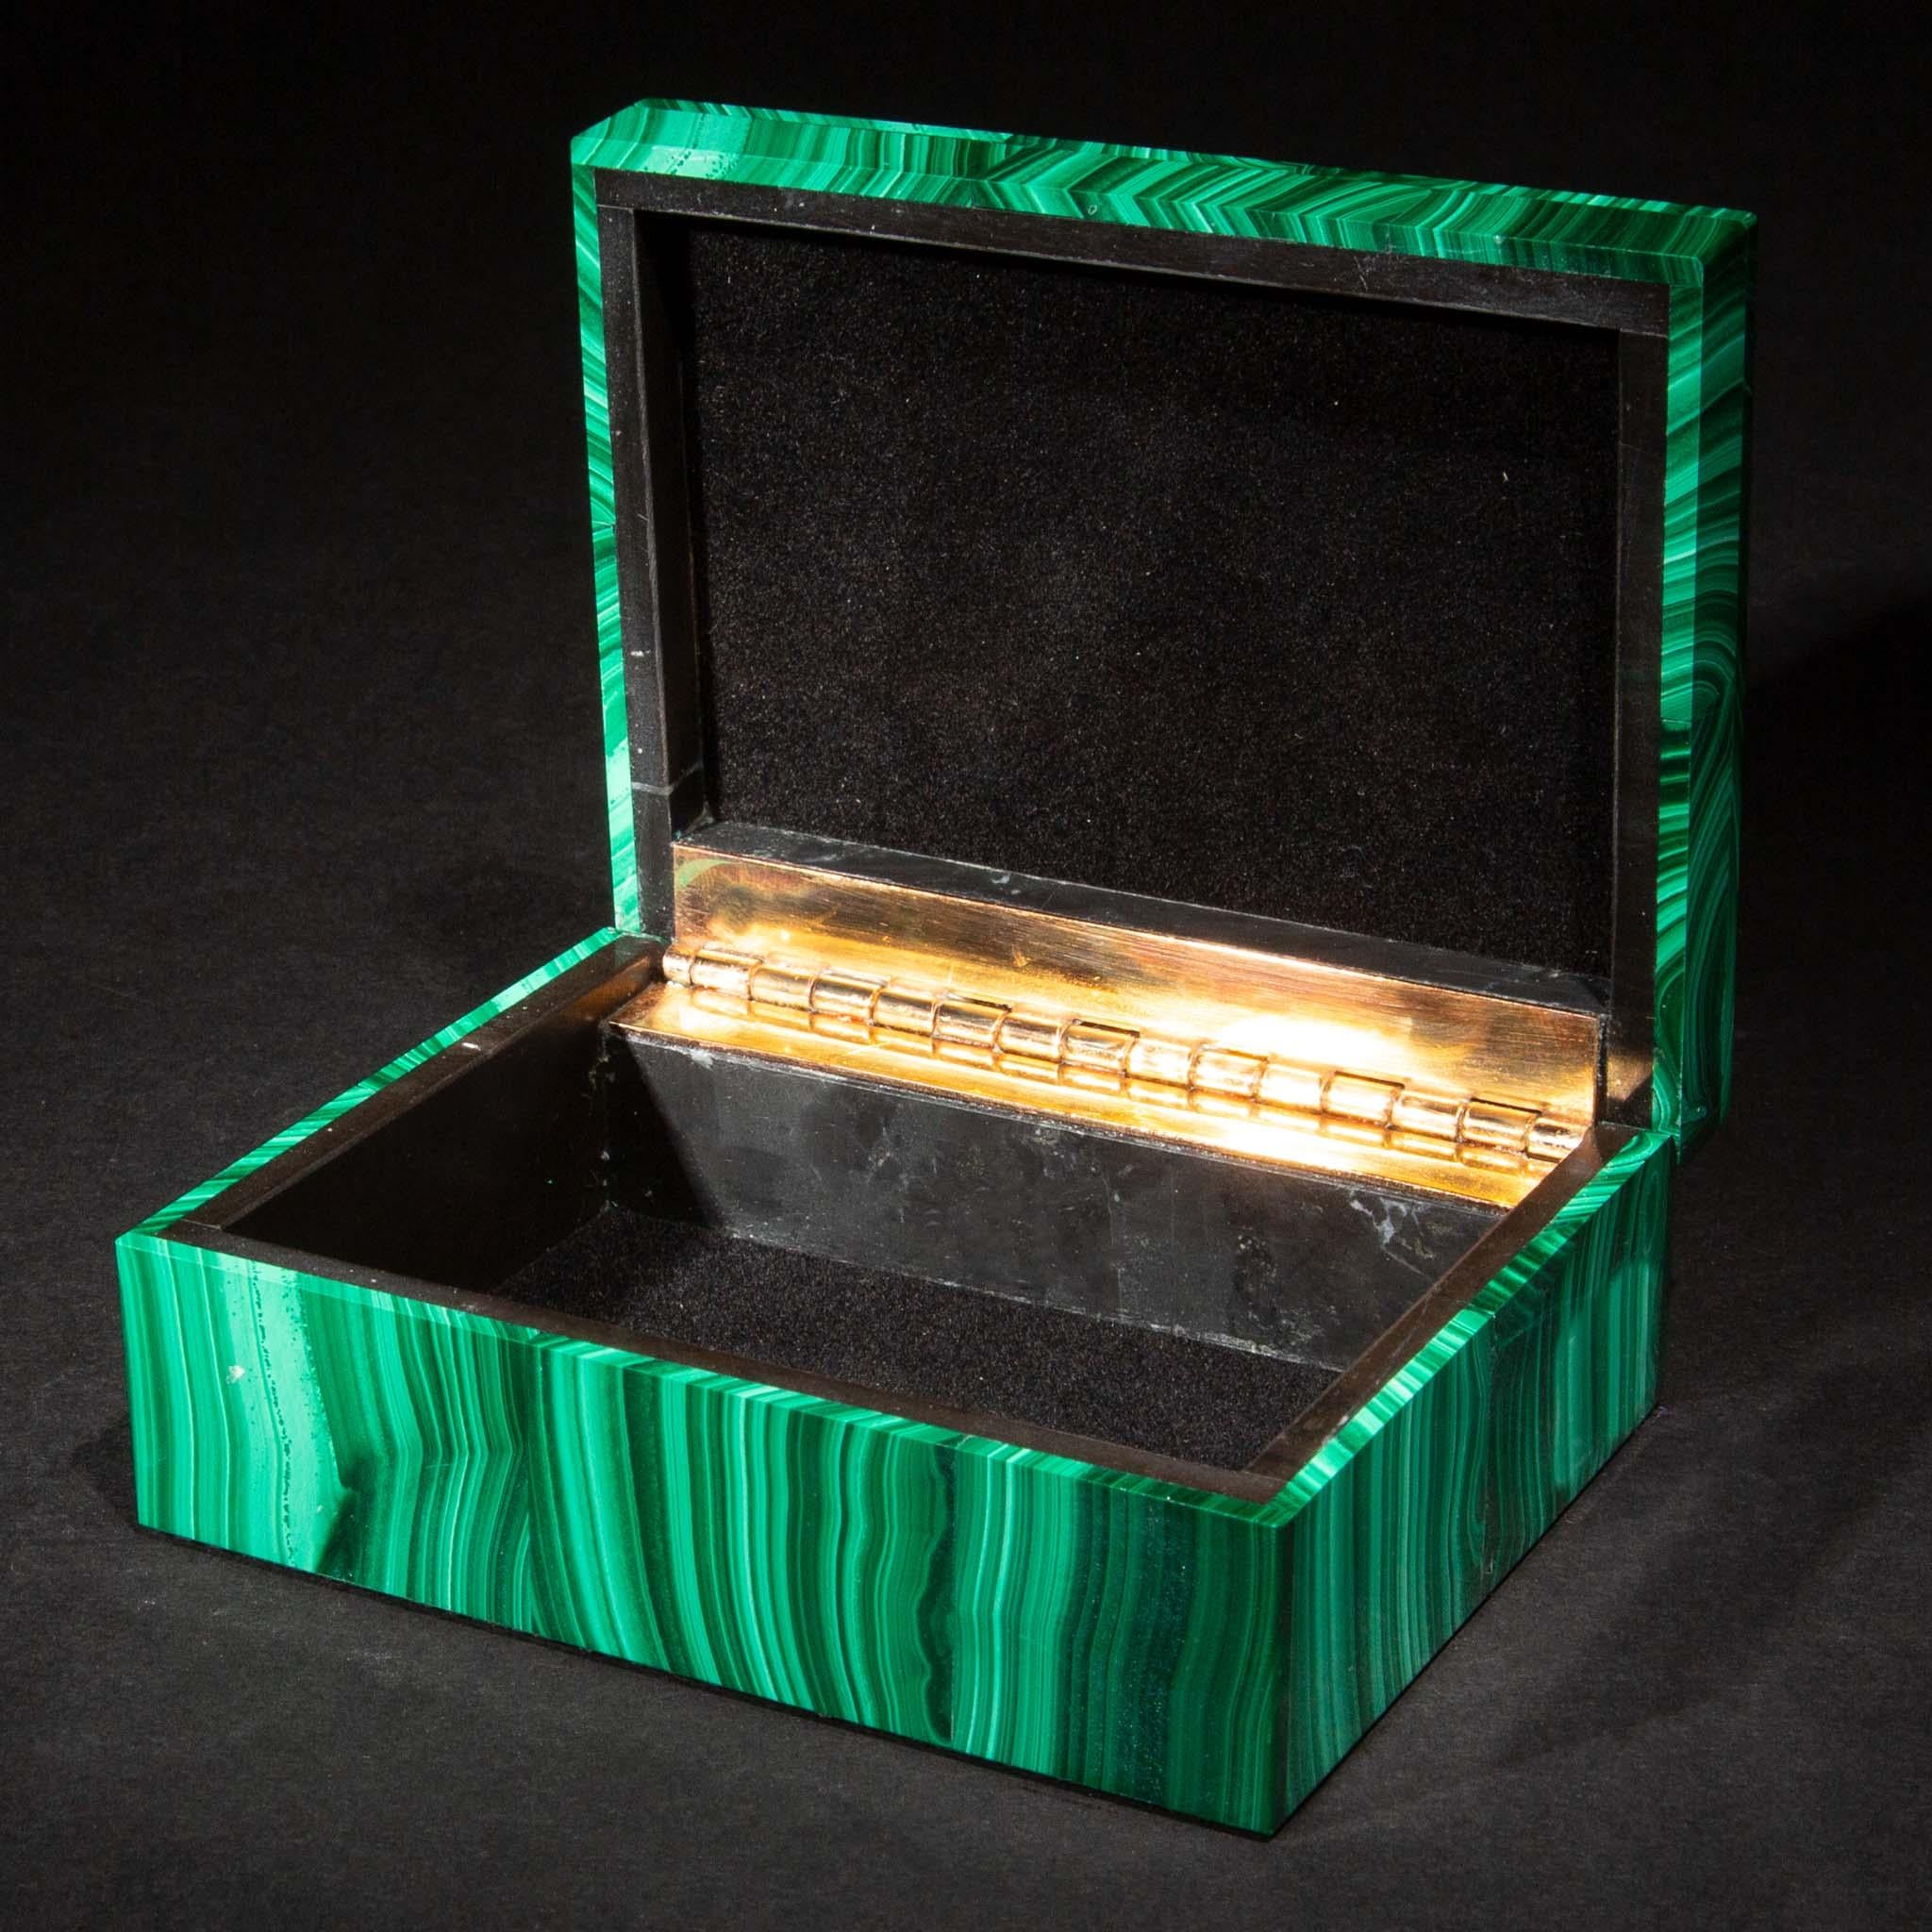 Decorative malachite box. The malachite for these boxes was sourced from the Congo, where the finest quality of this mineral is currently found. Malachite from the 18th and 19th century was also sourced from Russia. Boxes, such as this, were